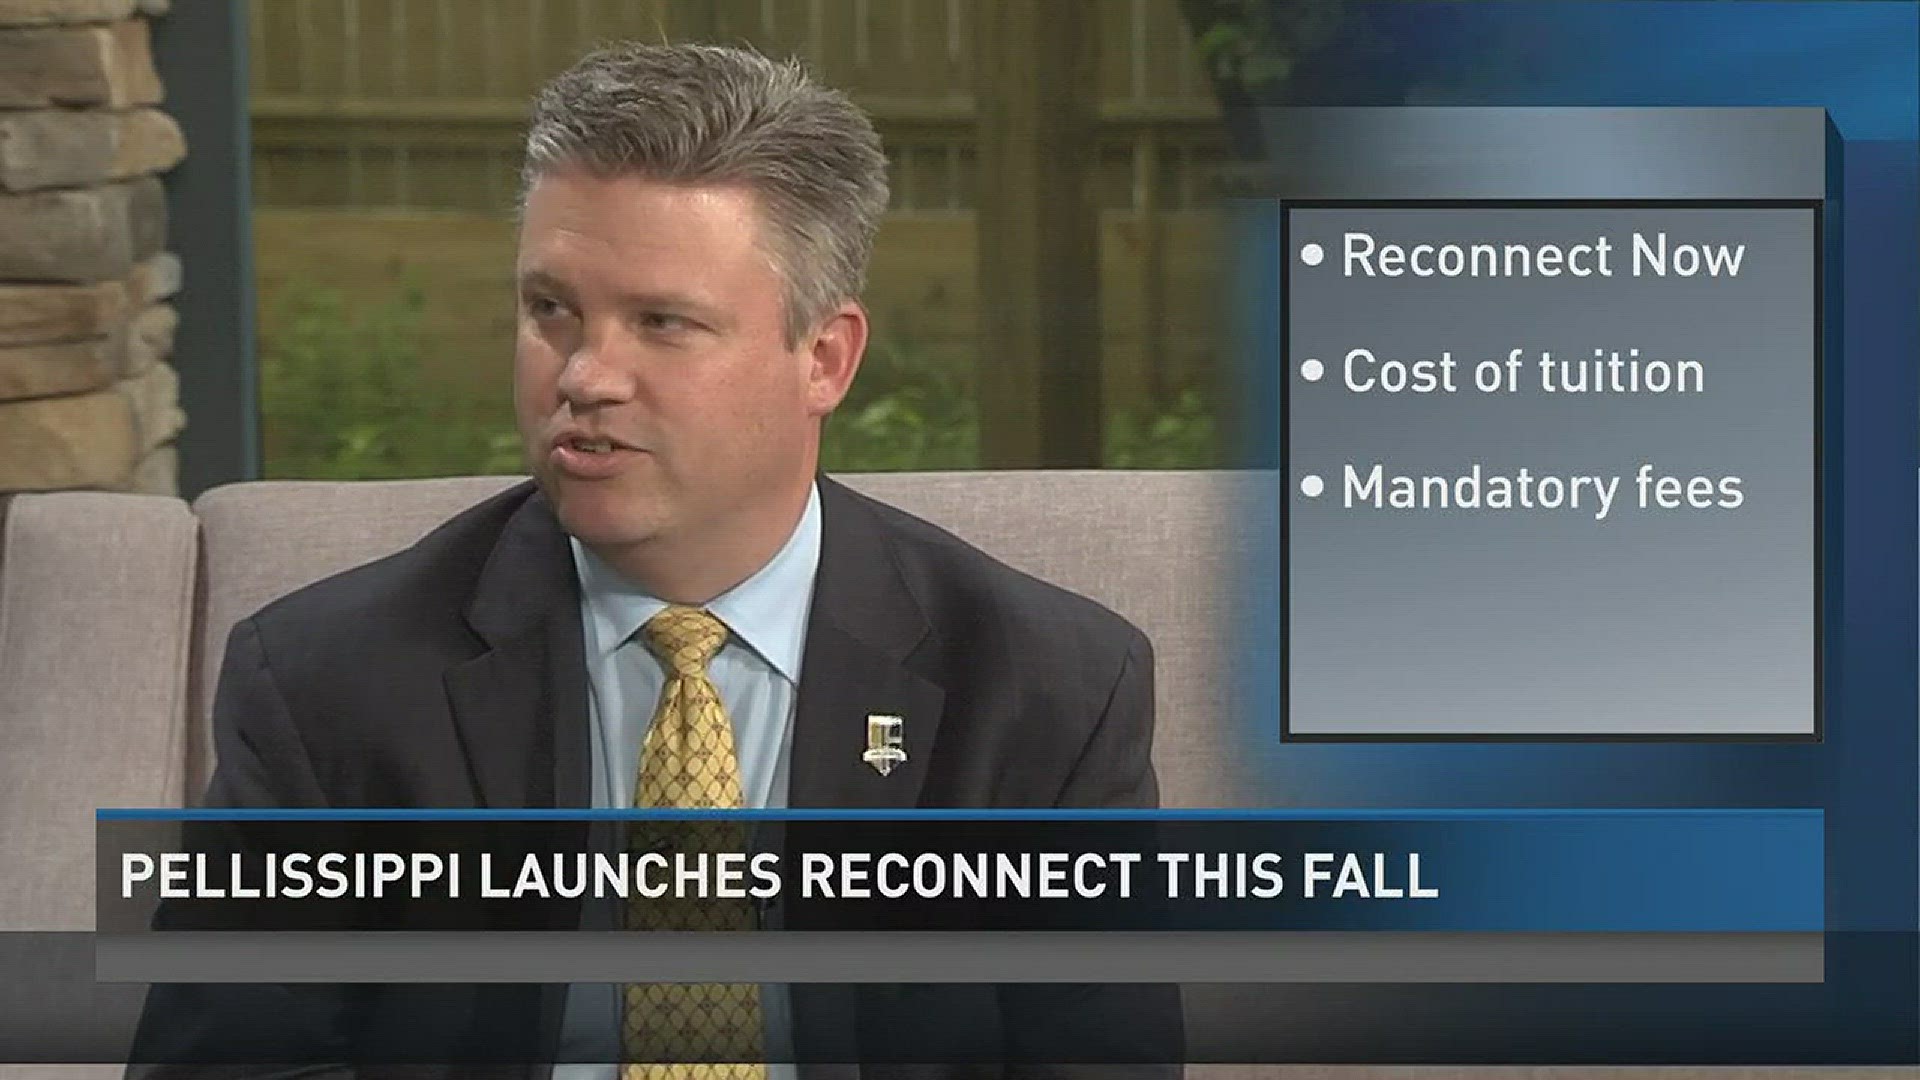 April 27, 2017: Pellissippi State Community College is launching the "Reconnect Now" program this fall that covers the cost of tuition and mandatory fees for adult students.